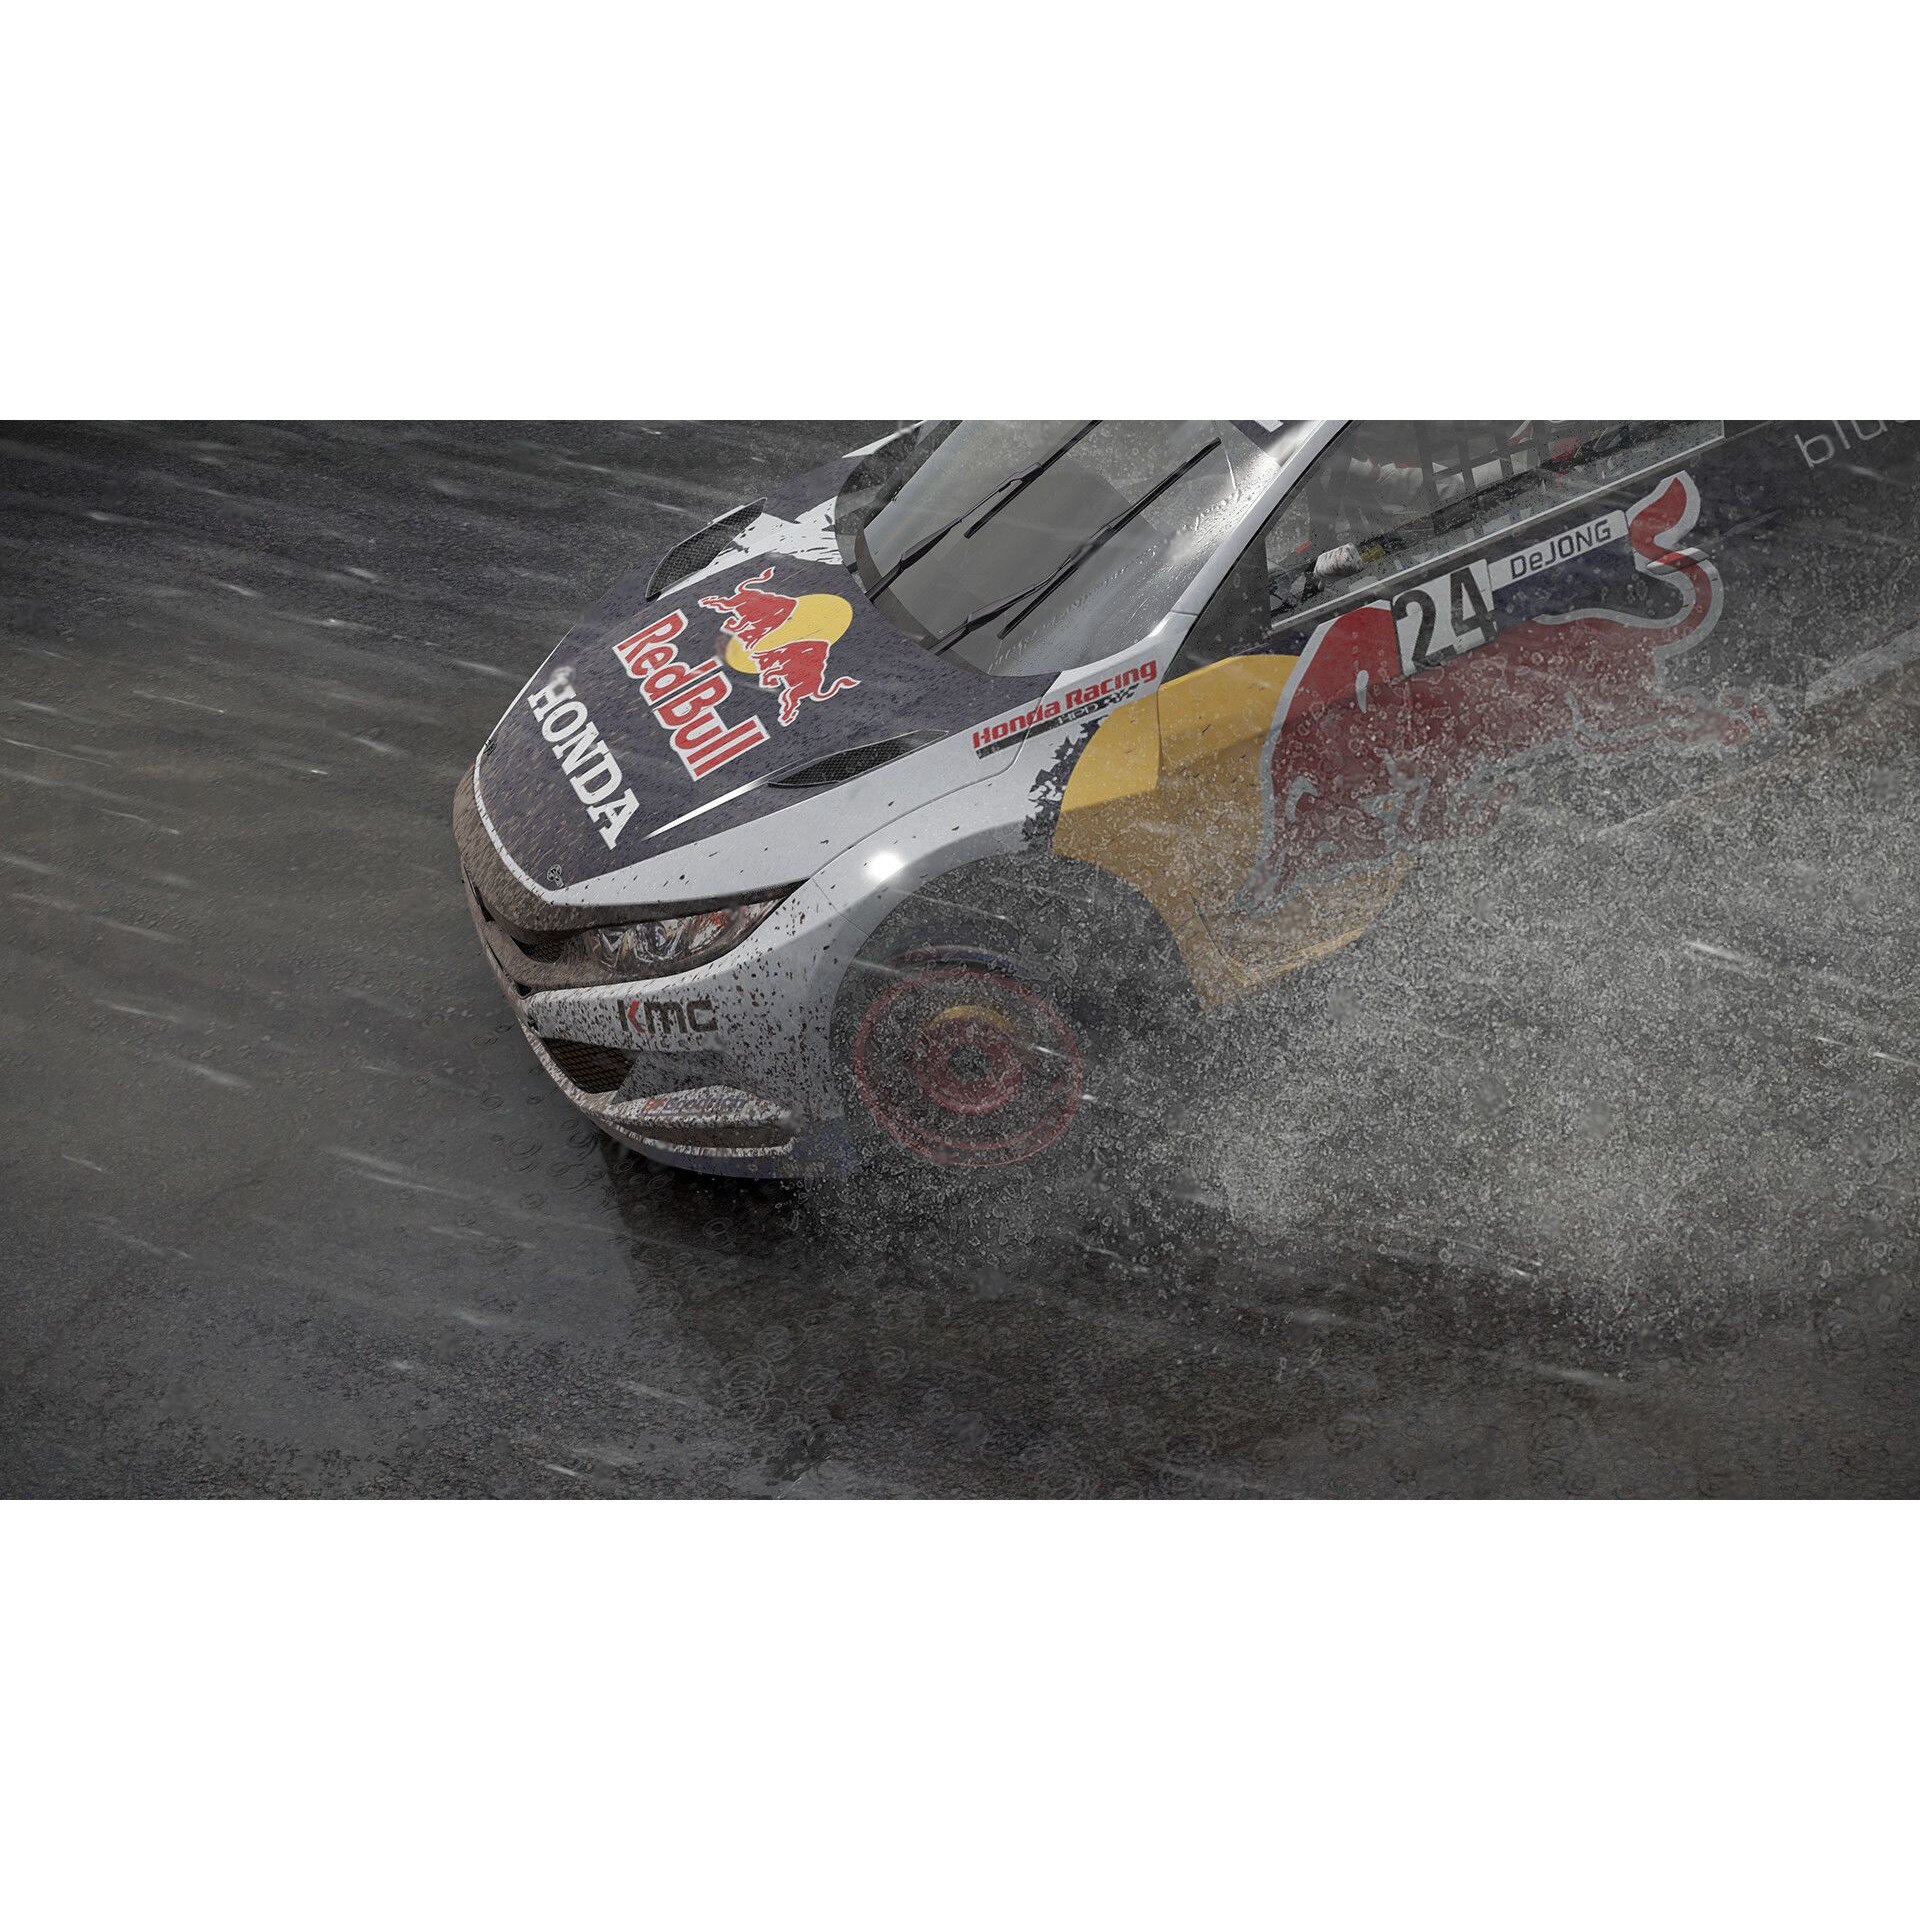 Project Cars 2 (Deluxe Edition) Steam Key GLOBAL